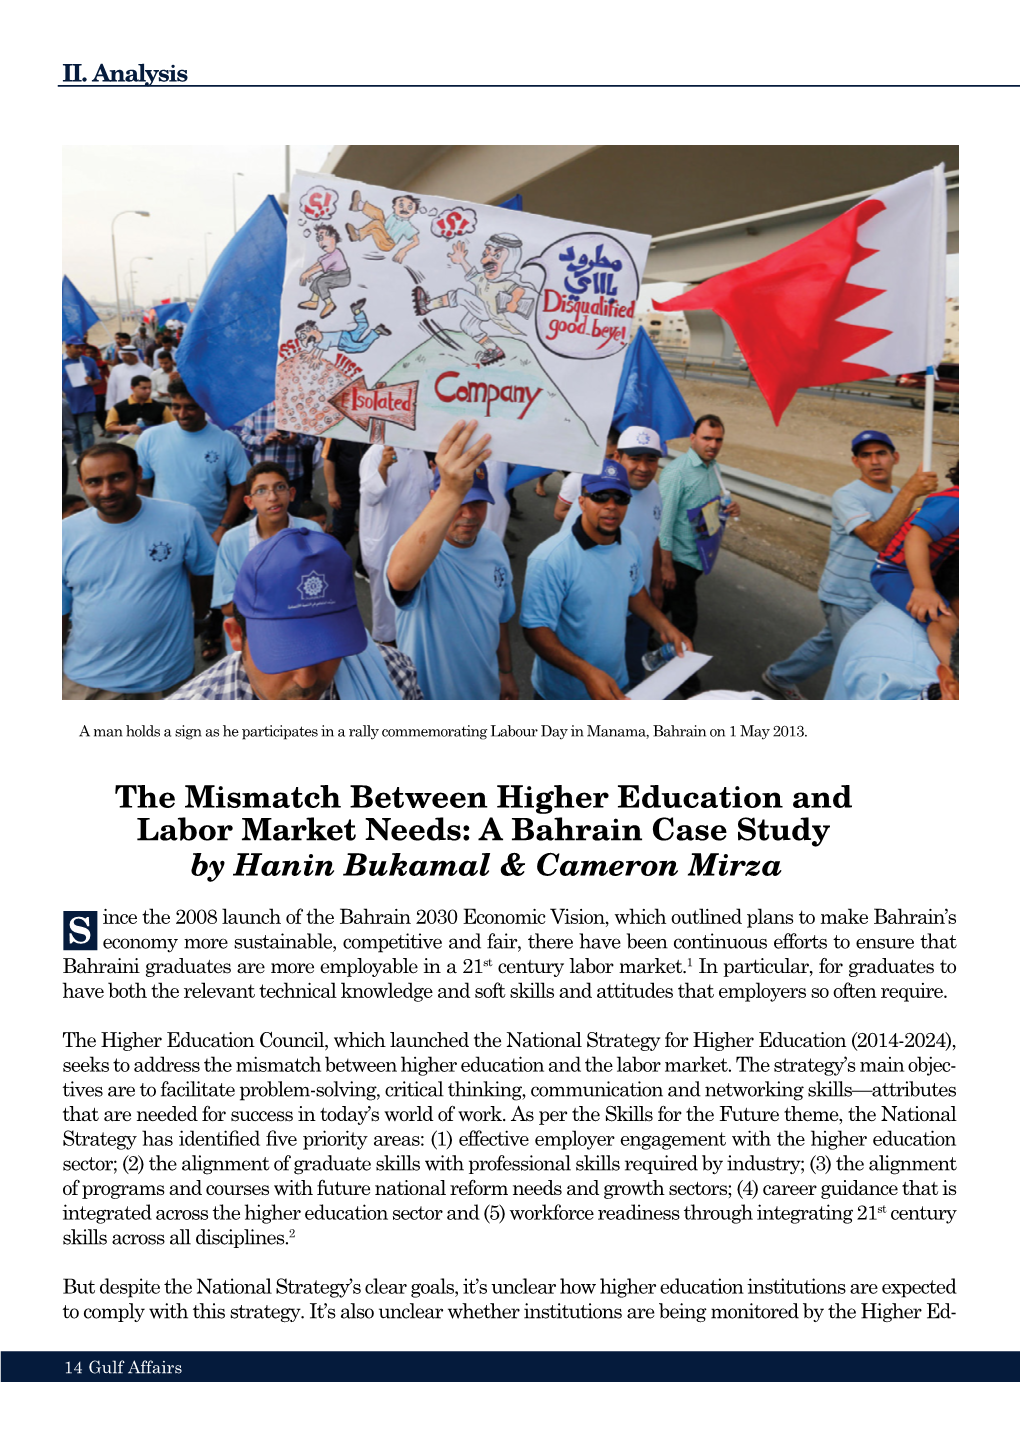 The Mismatch Between Higher Education and Labor Market Needs: a Bahrain Case Study by Hanin Bukamal & Cameron Mirza